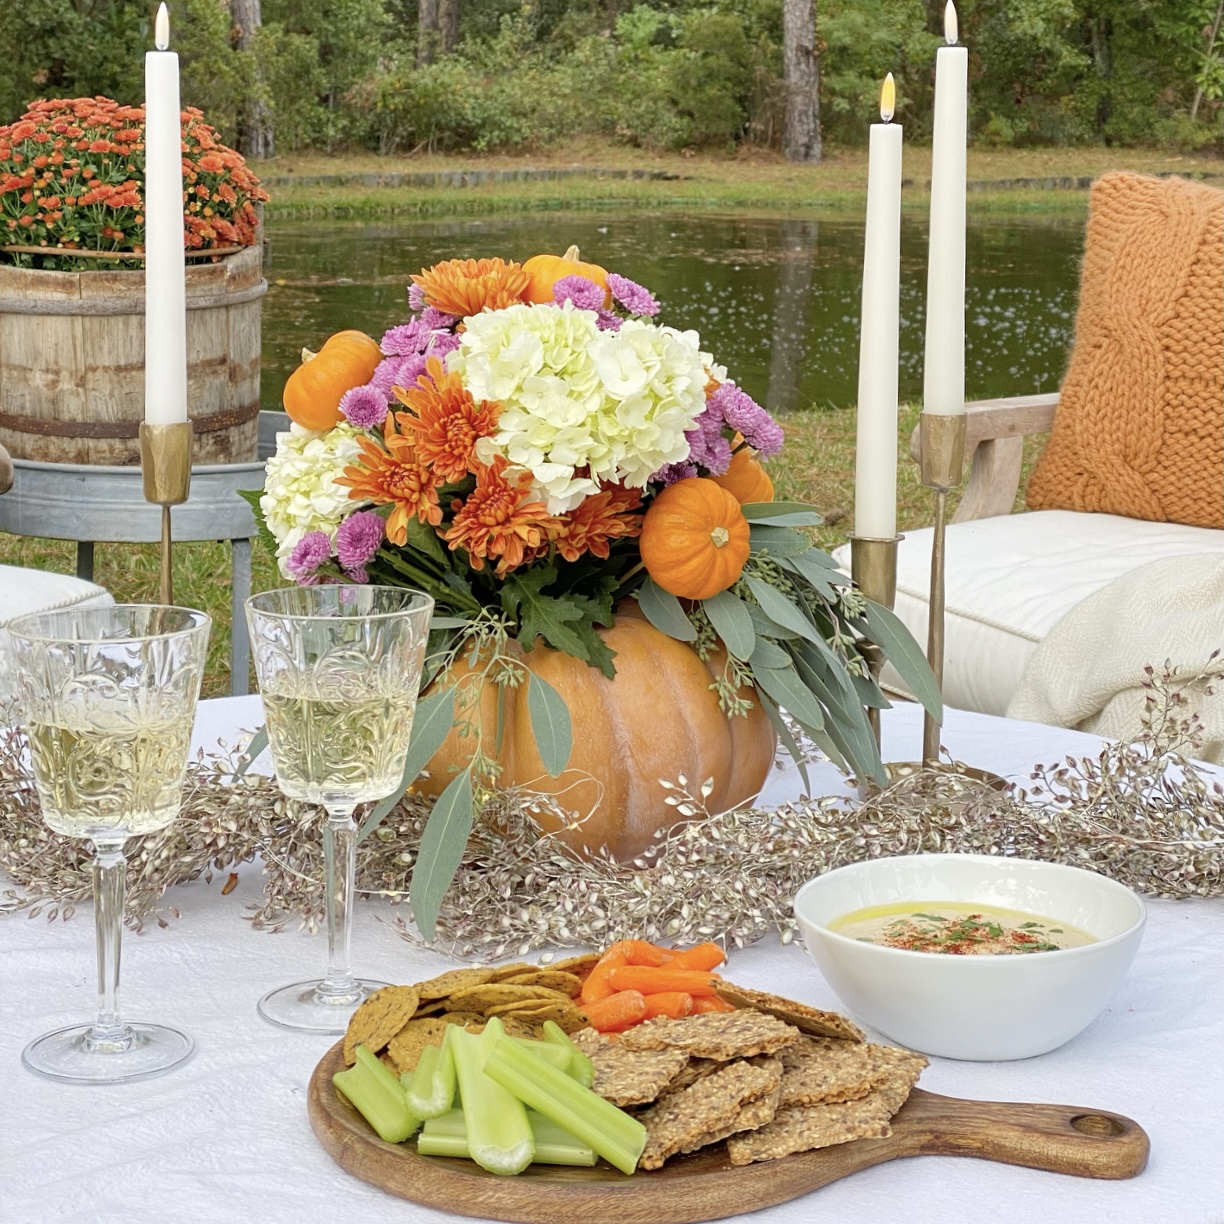 White bean hummus on the table with a fall floral arrangement, wine, and candles.